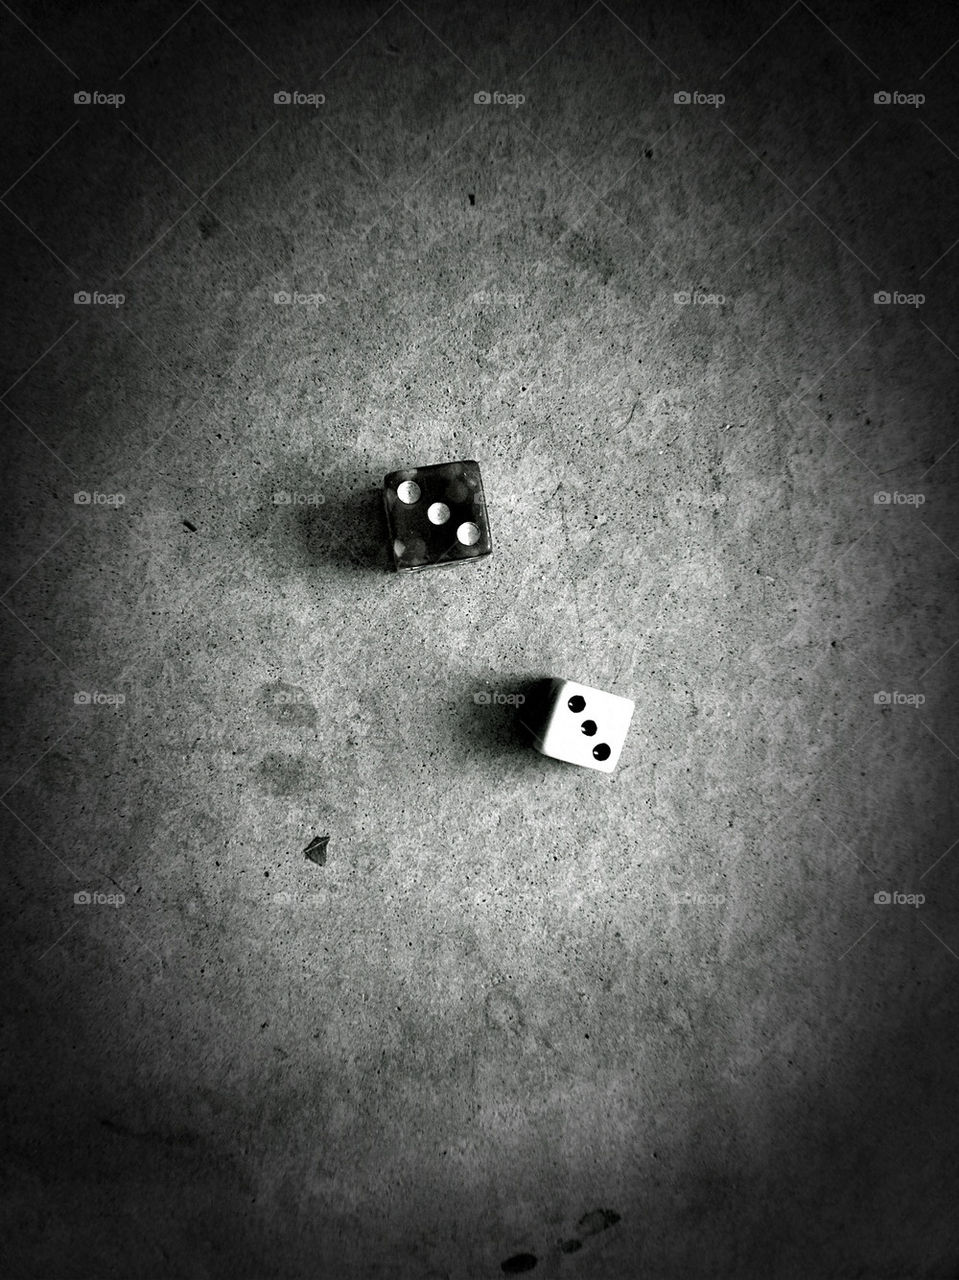 black and white dice by blaqrayne